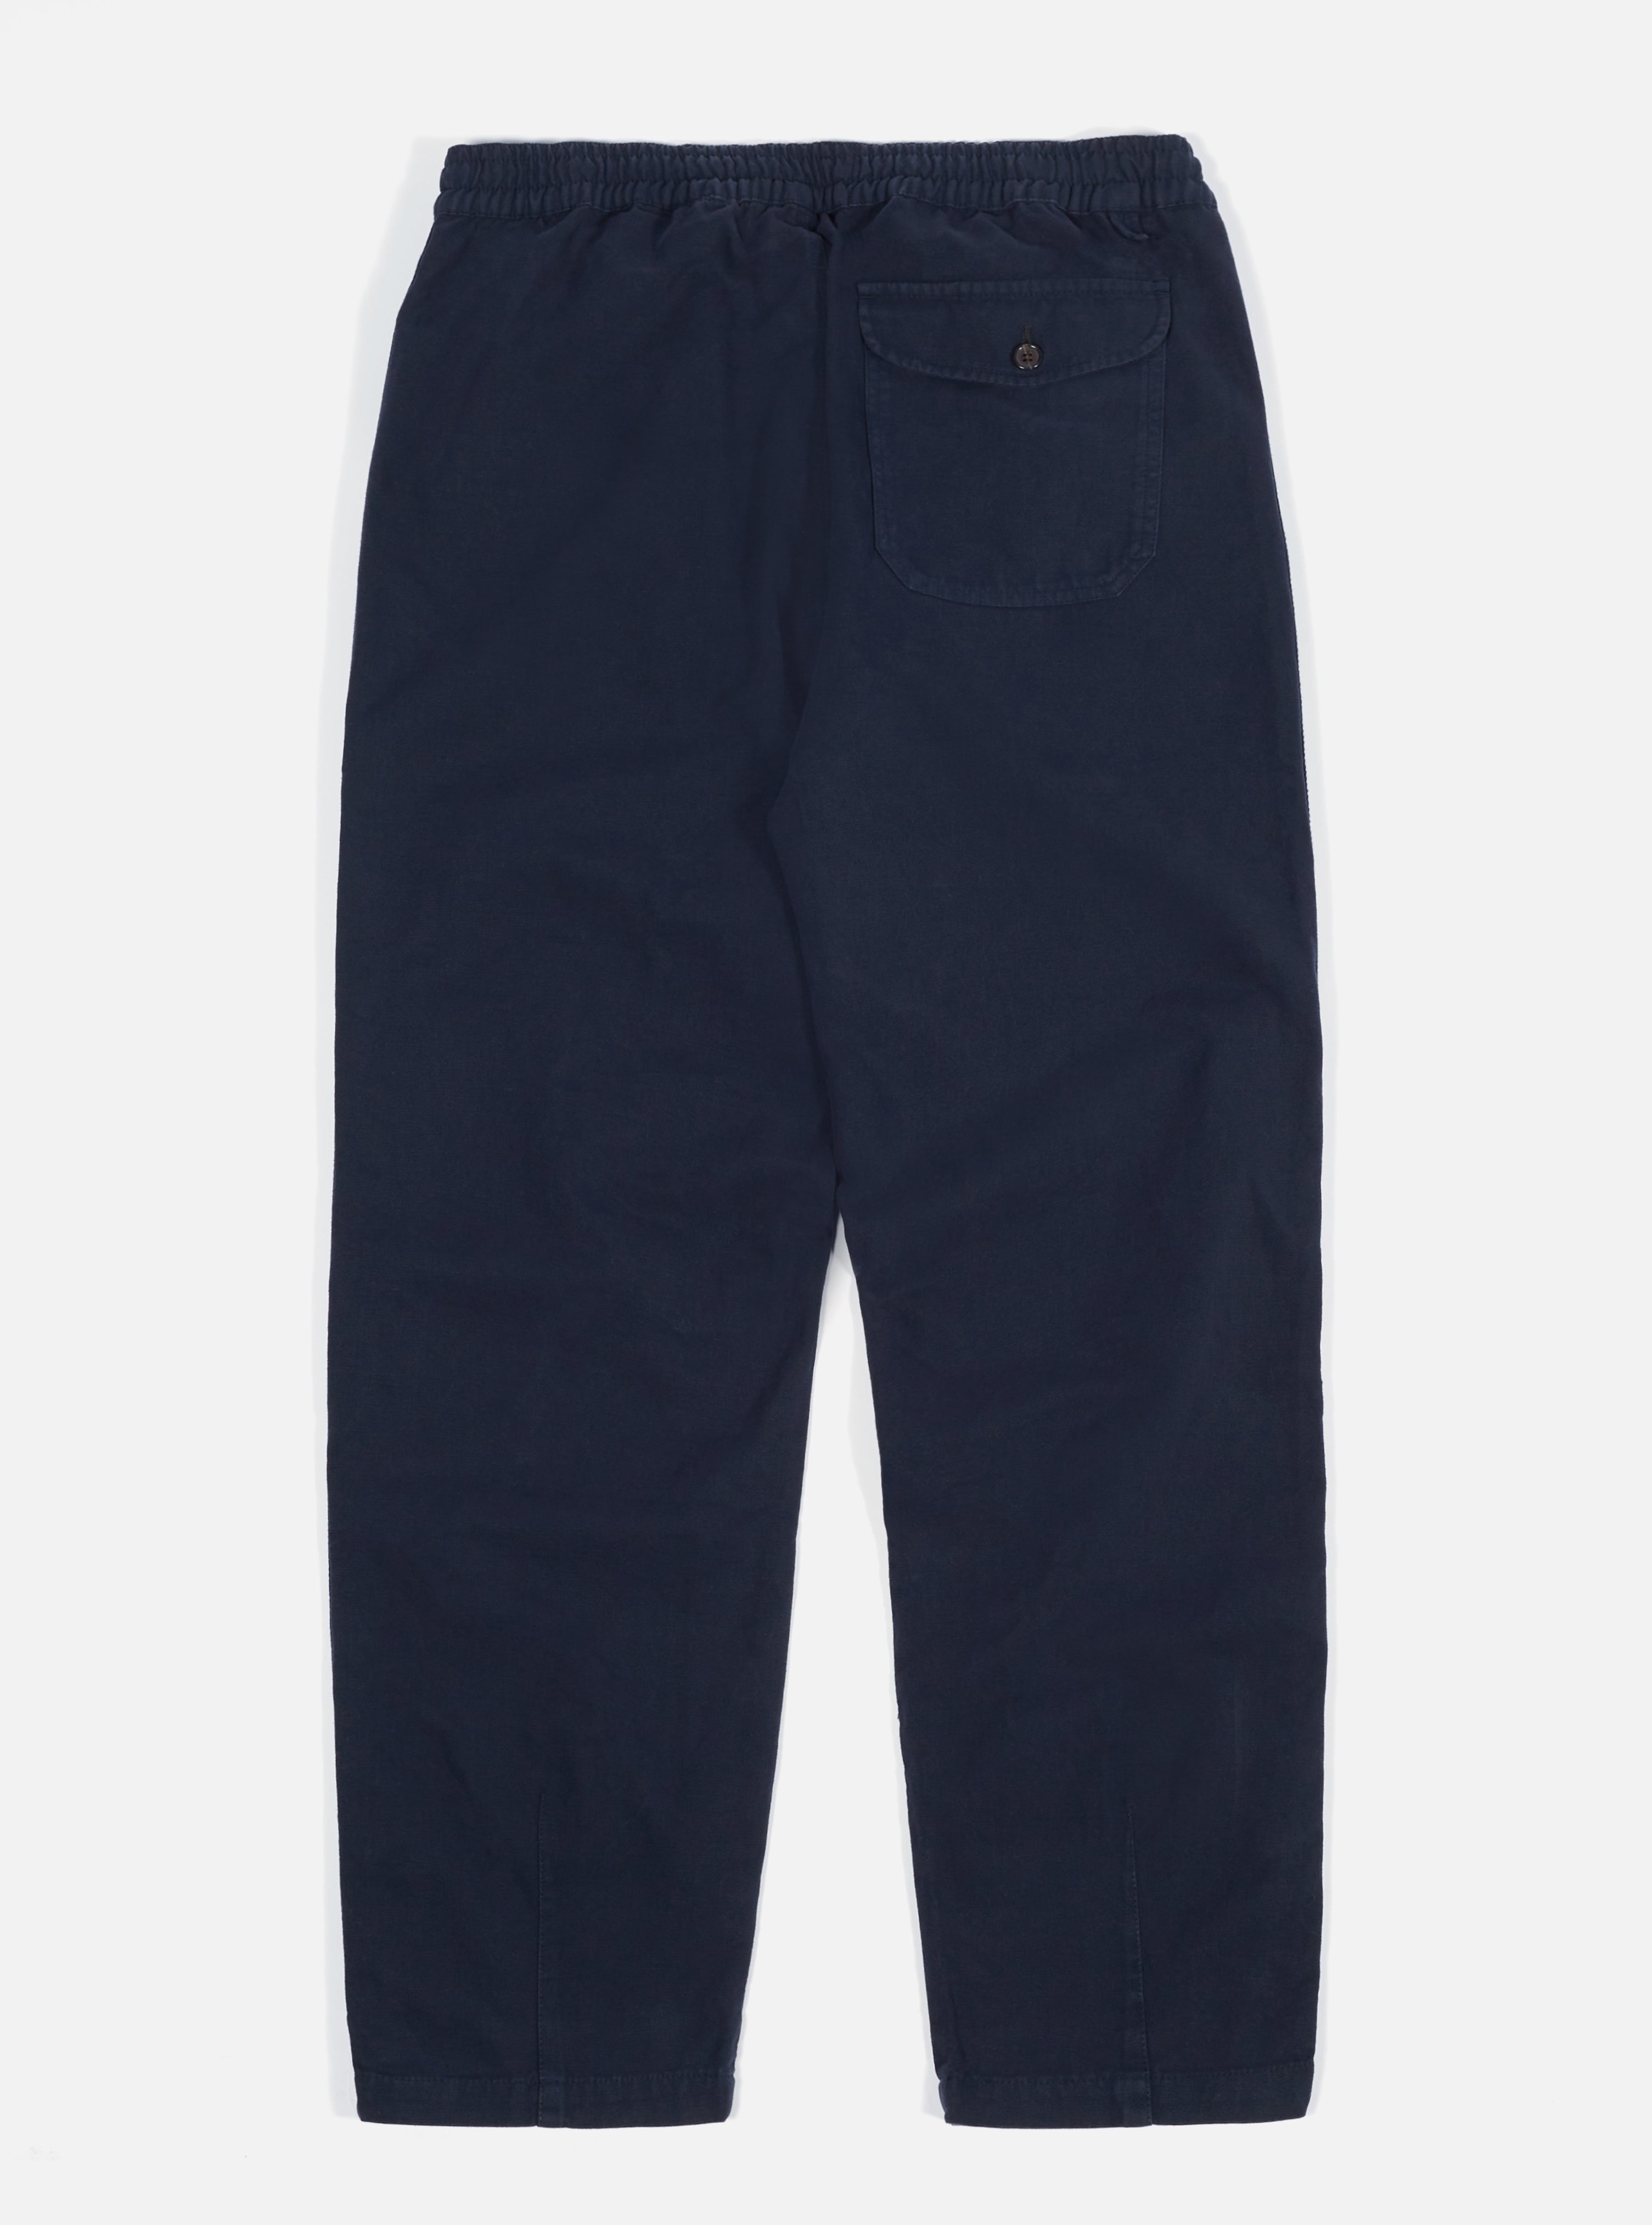 RUGGED PROFESSIONAL SERIES RUGGED FLEX RELAXED FIT CANVAS WORK PANT   Carhartt